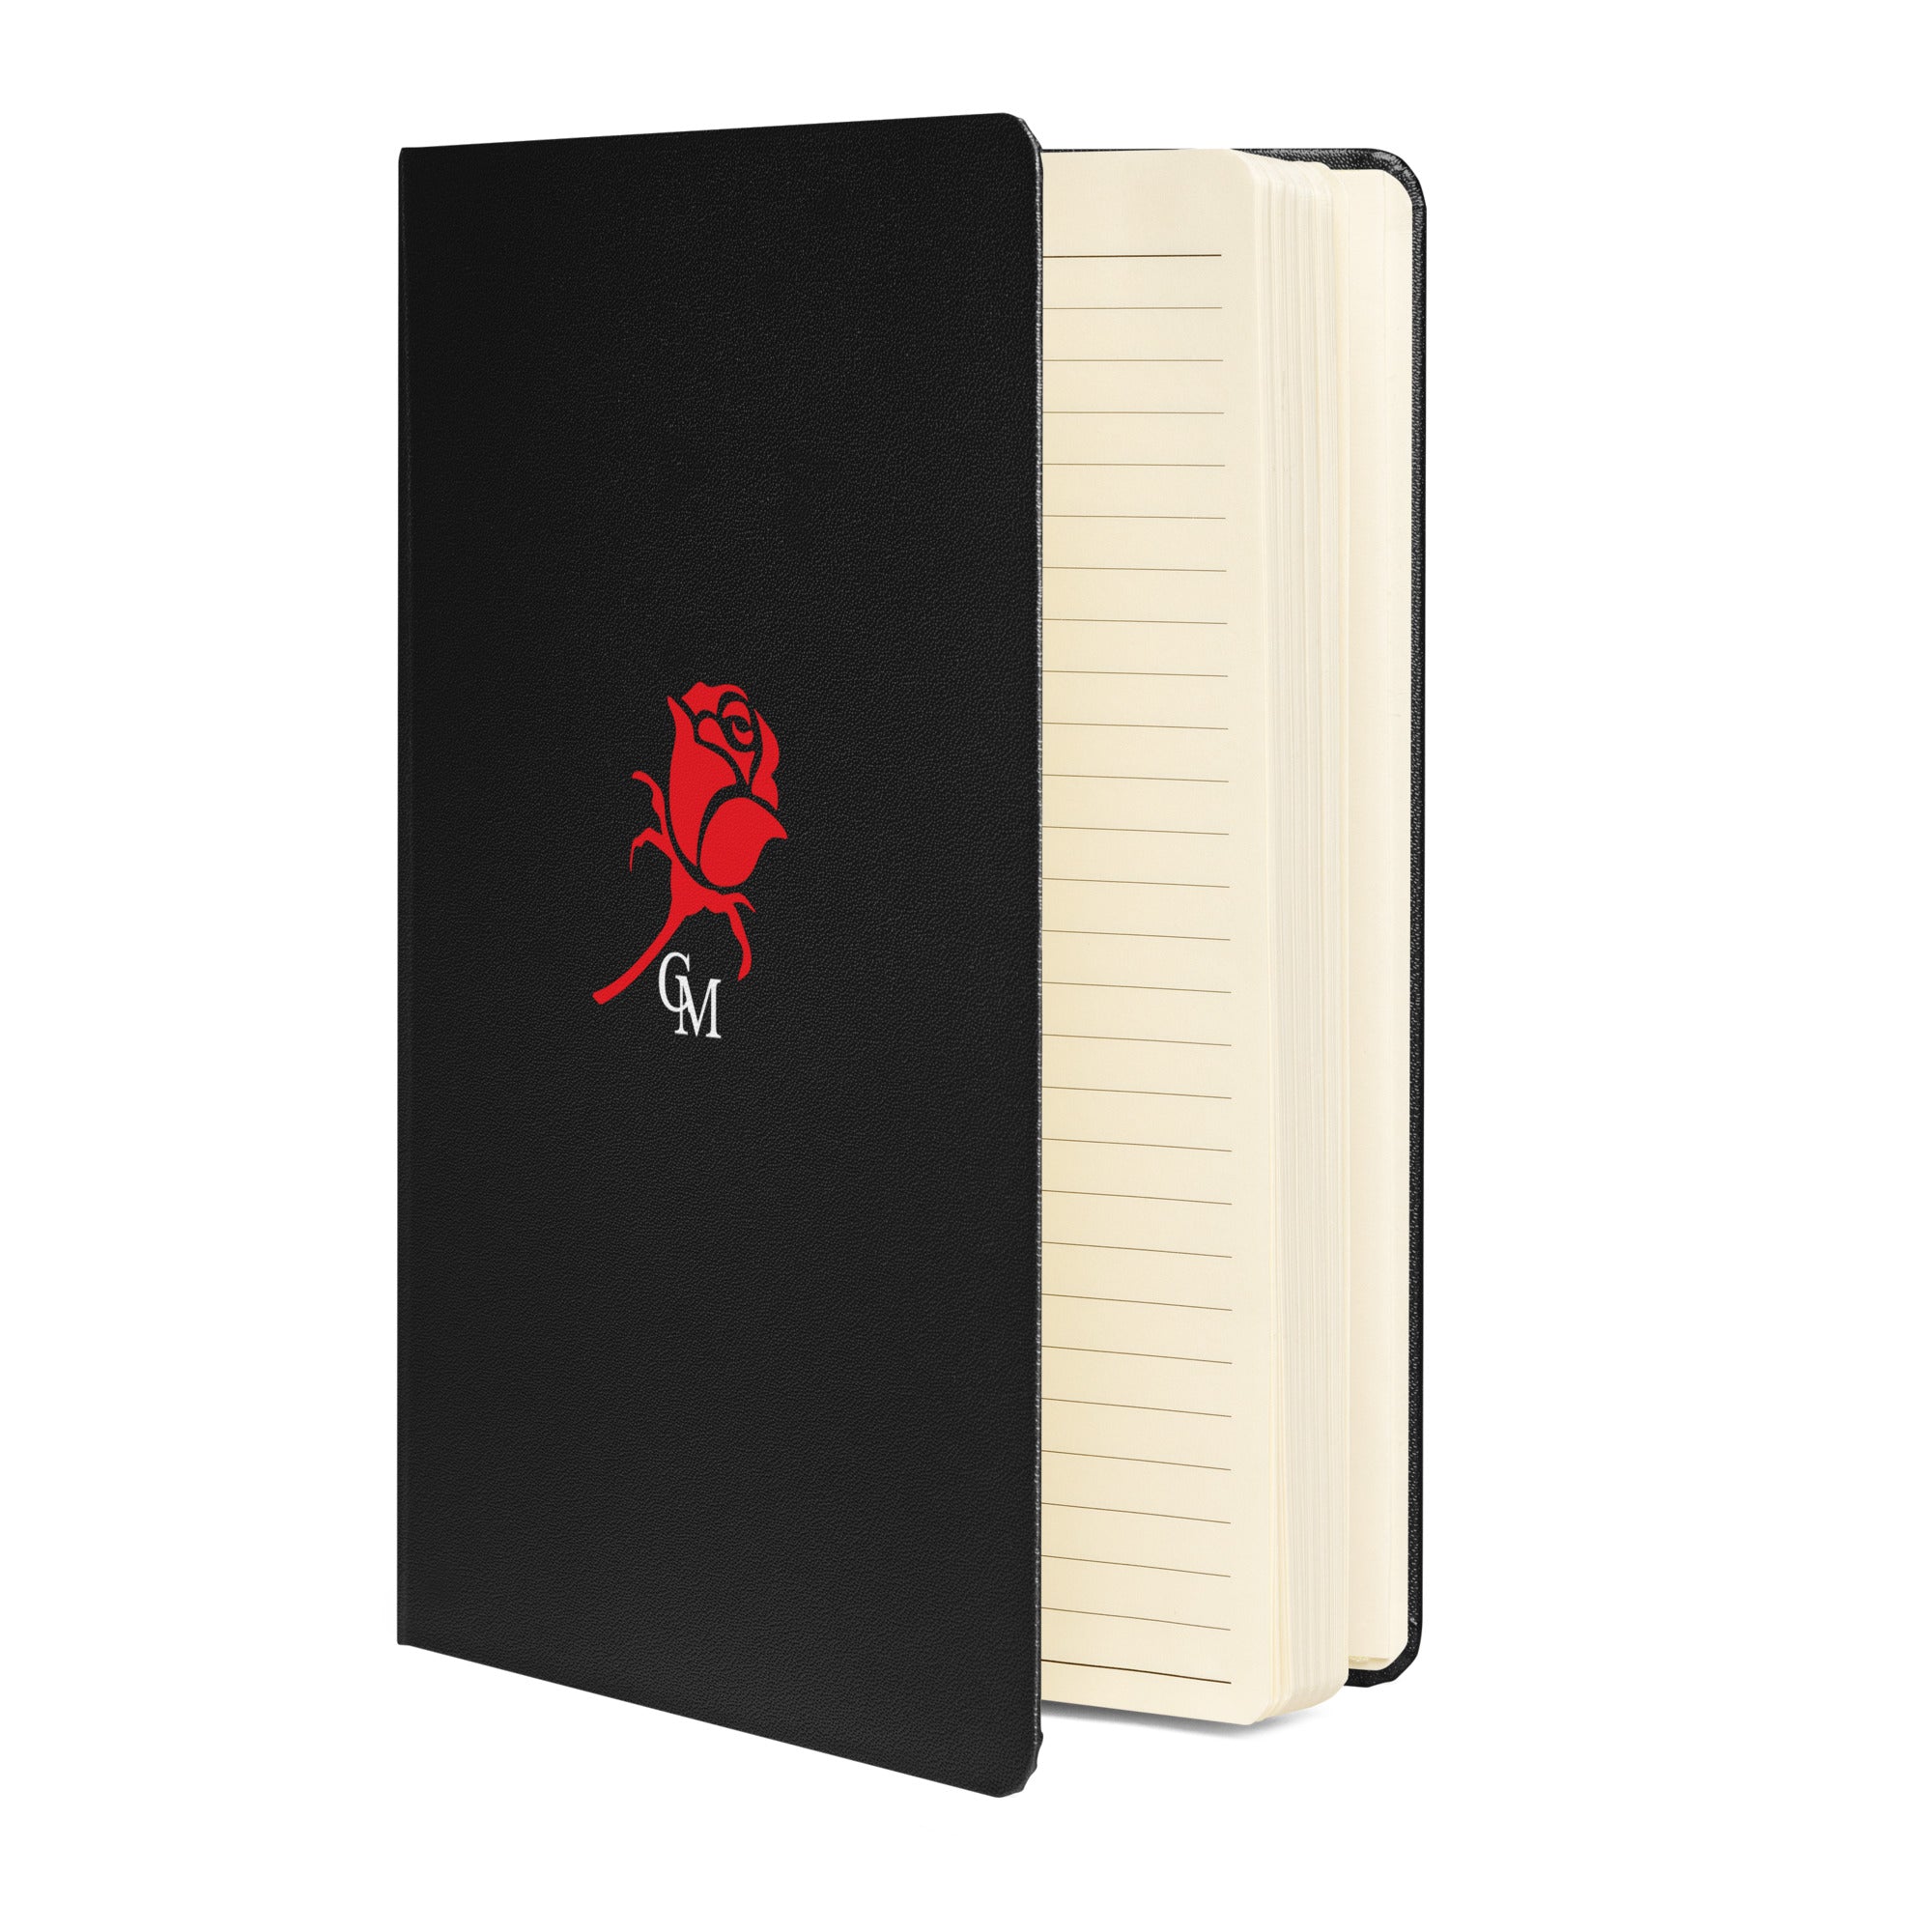 CM Red Rose Hardcover bound journal/notebook